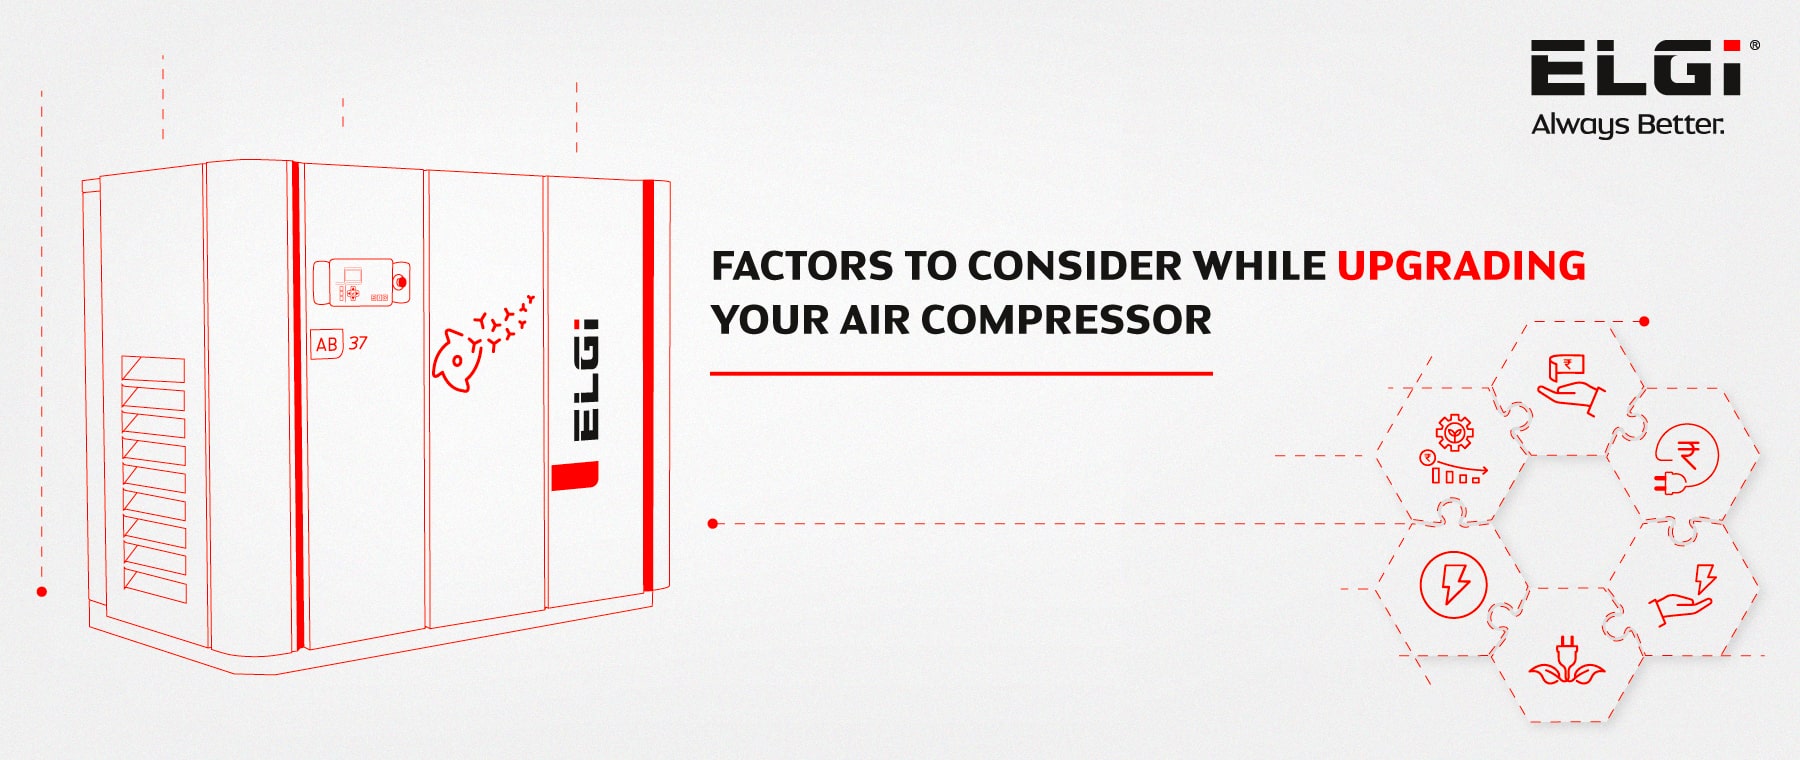 Factors to Consider While Upgrading Your Air Compressors